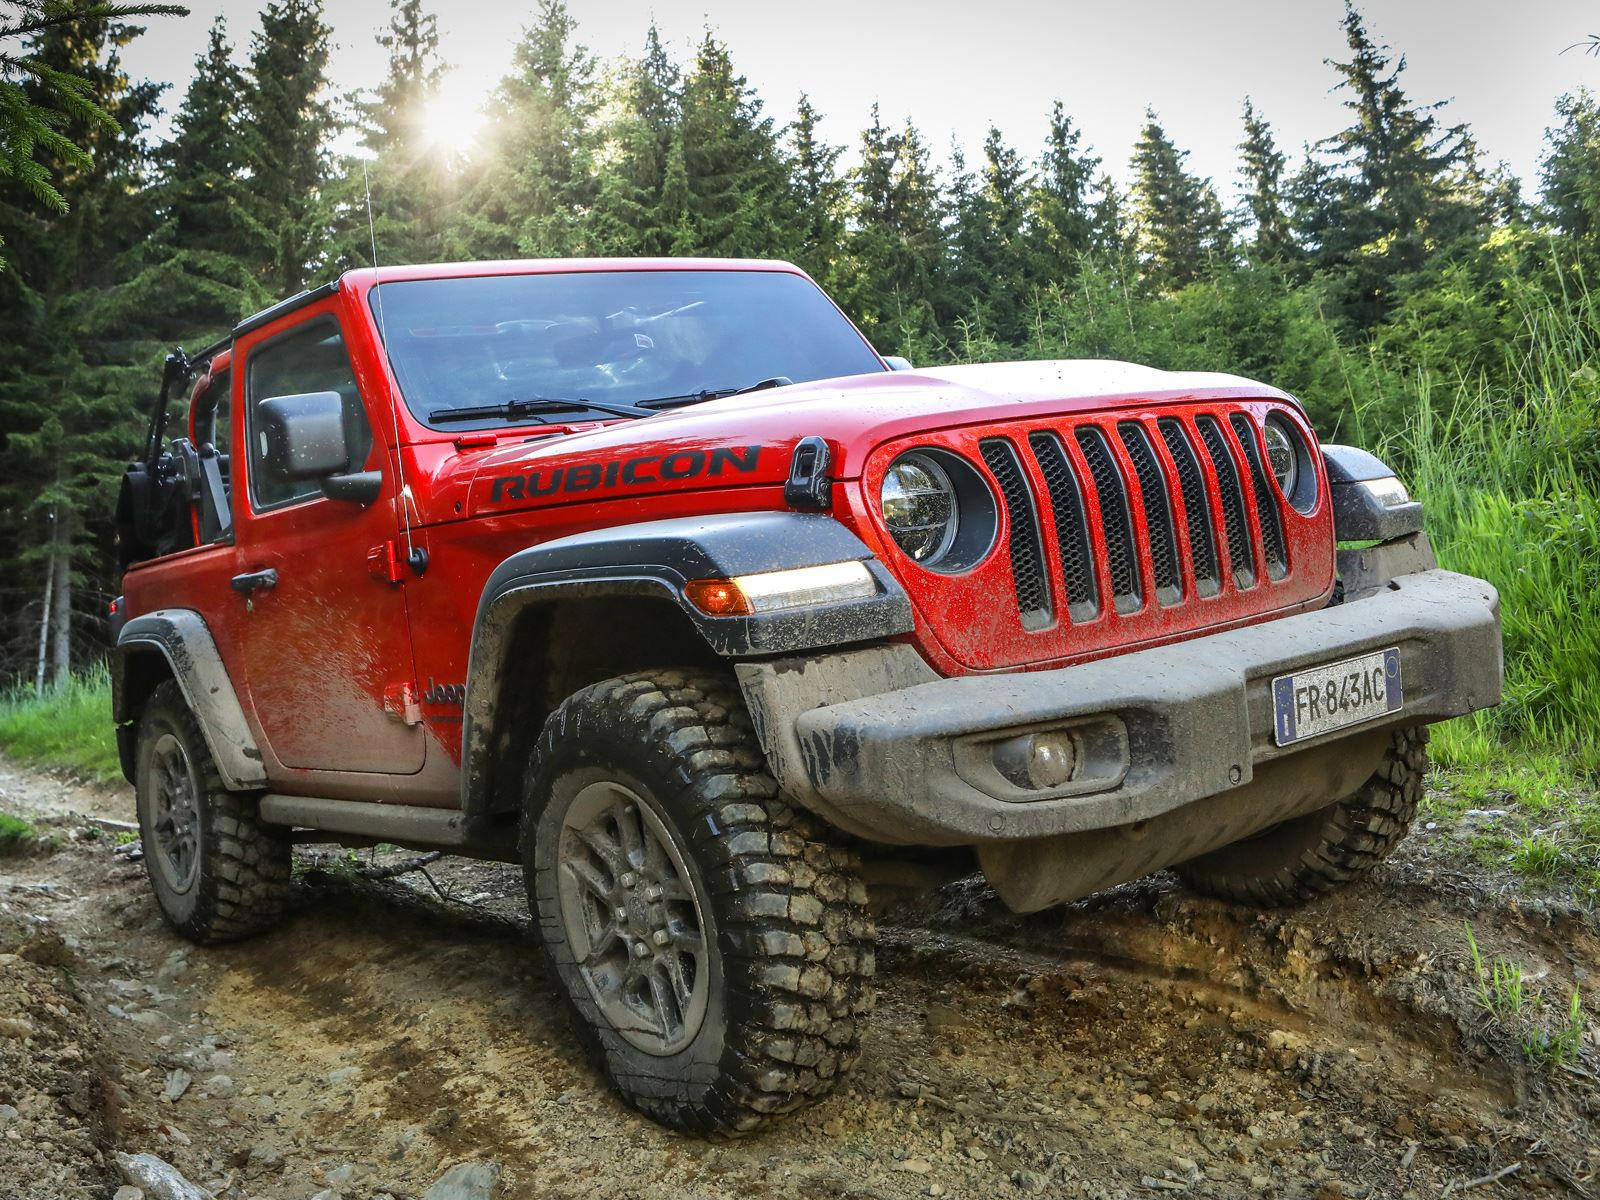 Here Are The Diesel Engine Specs For Europe's 2019 Jeep Wrangler | CarBuzz